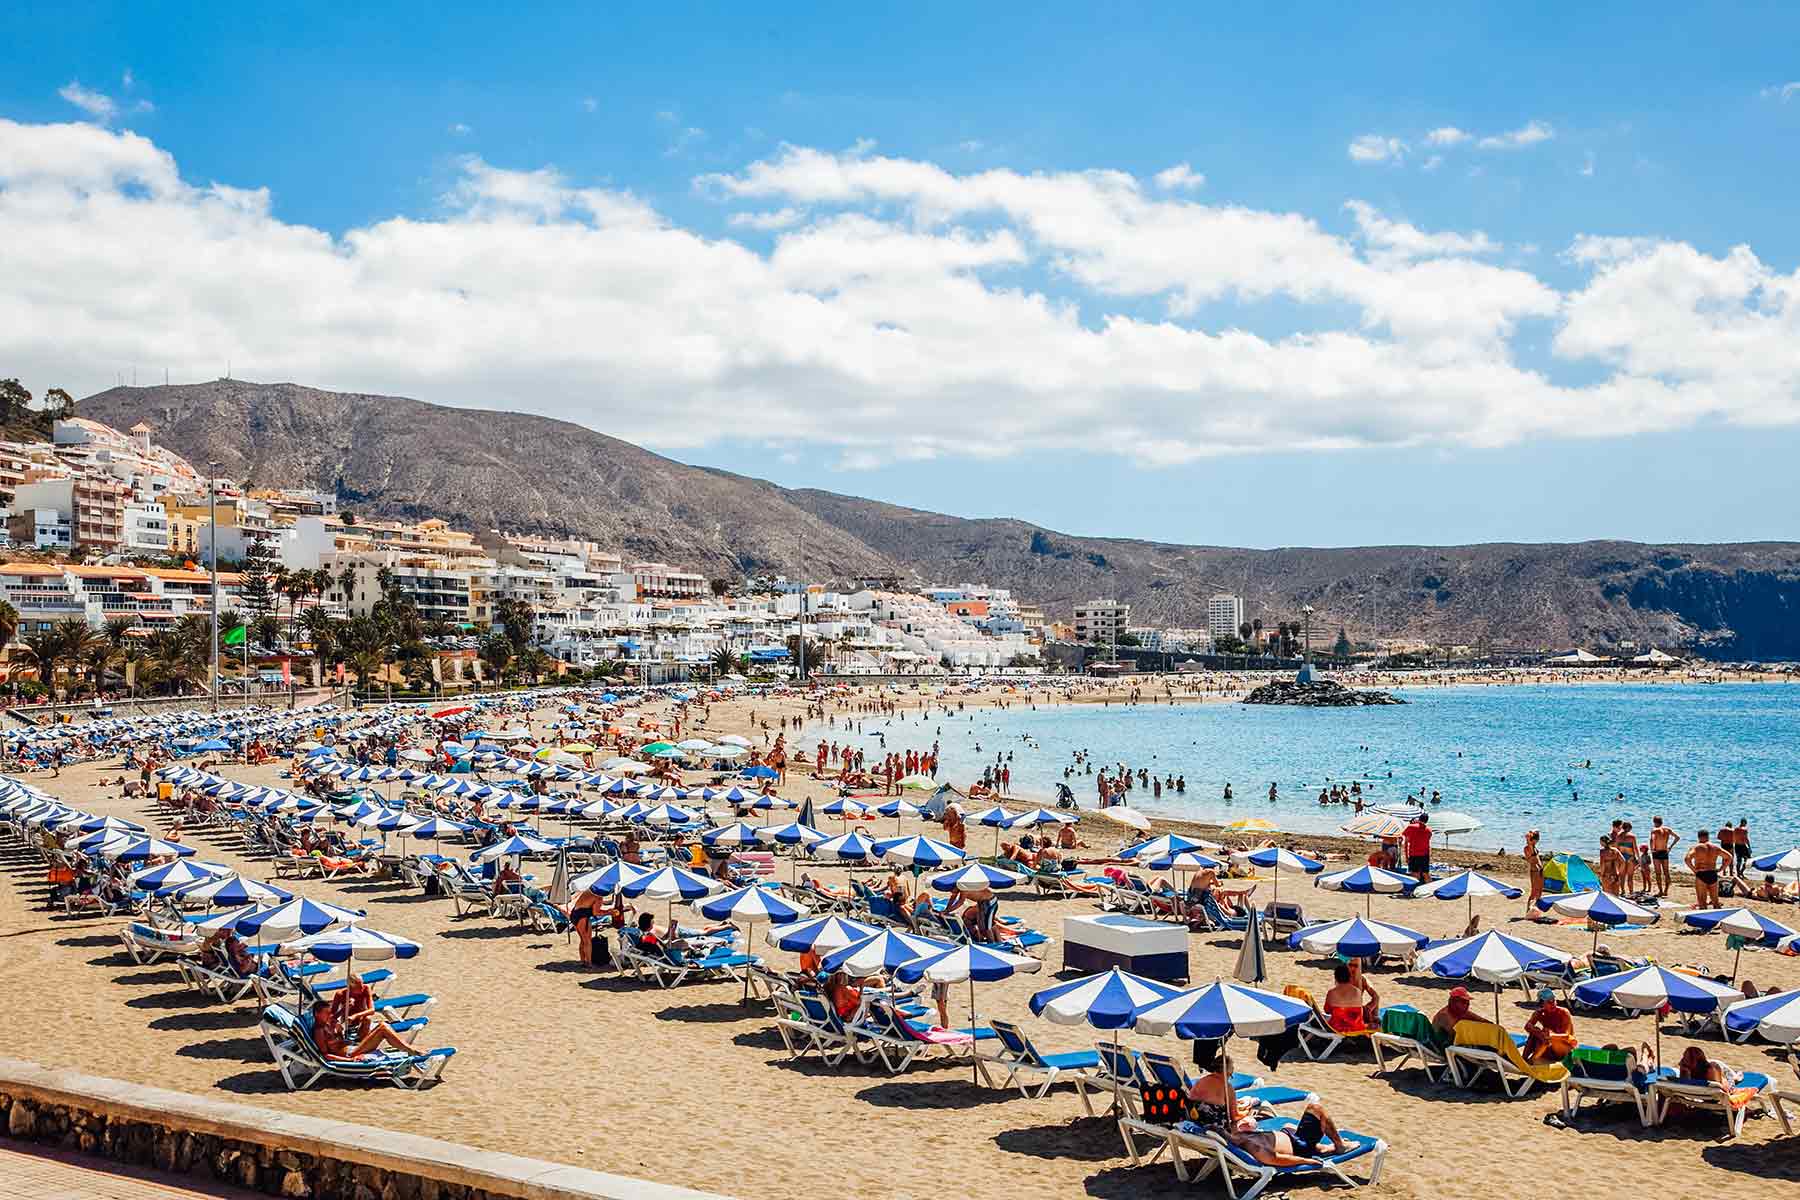 People on the Los Cristianos beach